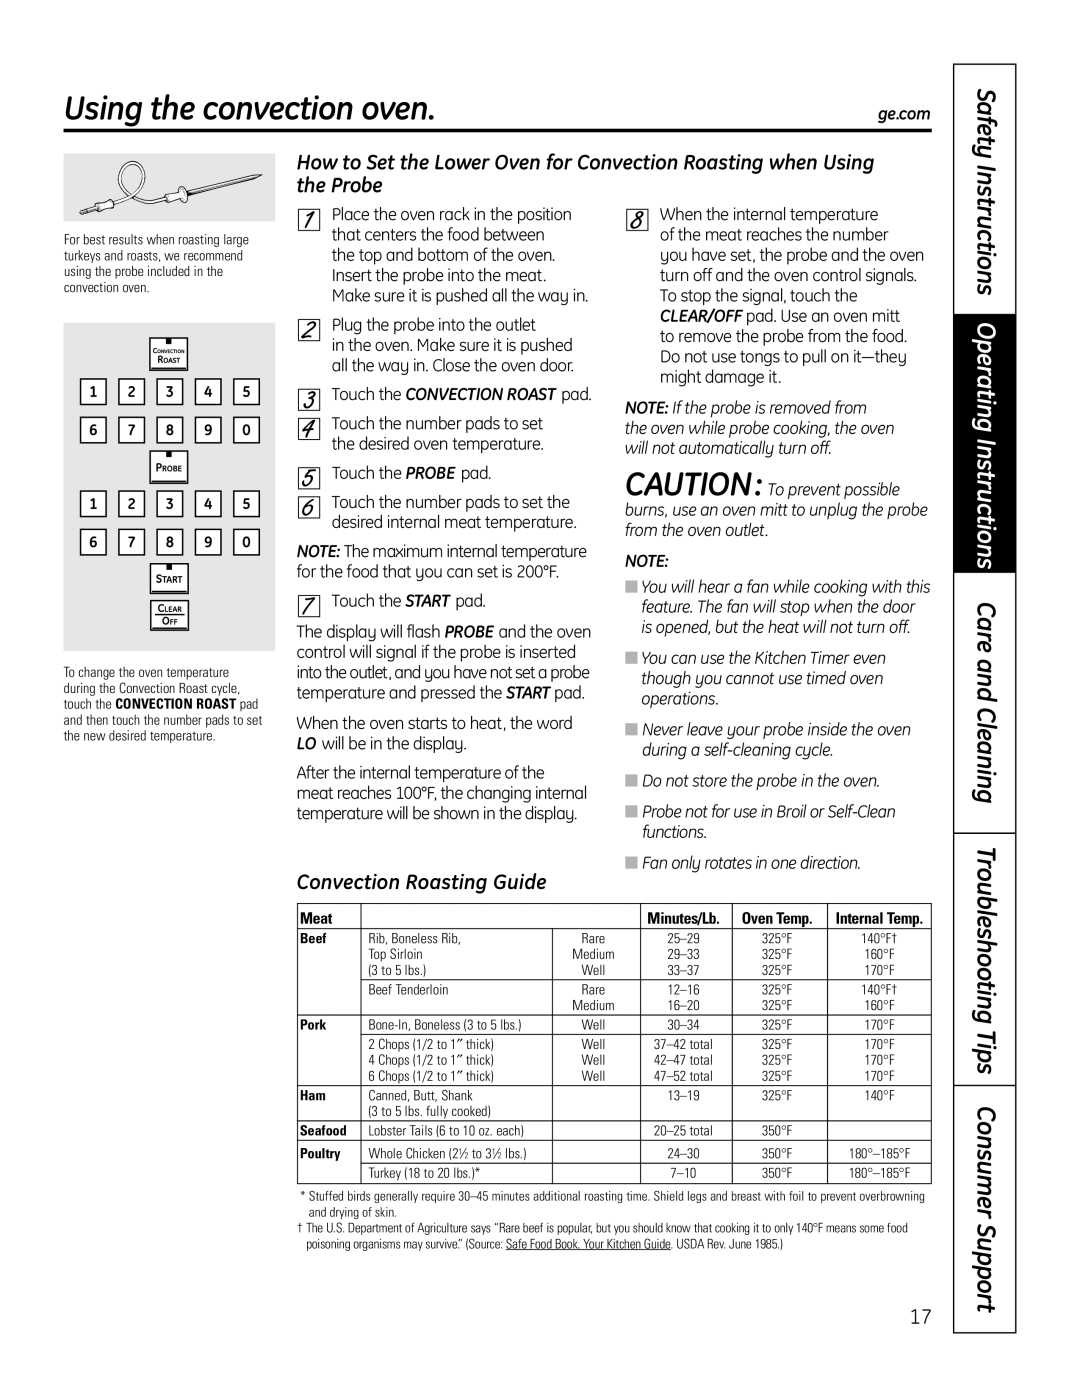 GE PT925 manual Instructions Operating Instructions Care and Cleaning, Troubleshooting Tips Consumer Support 